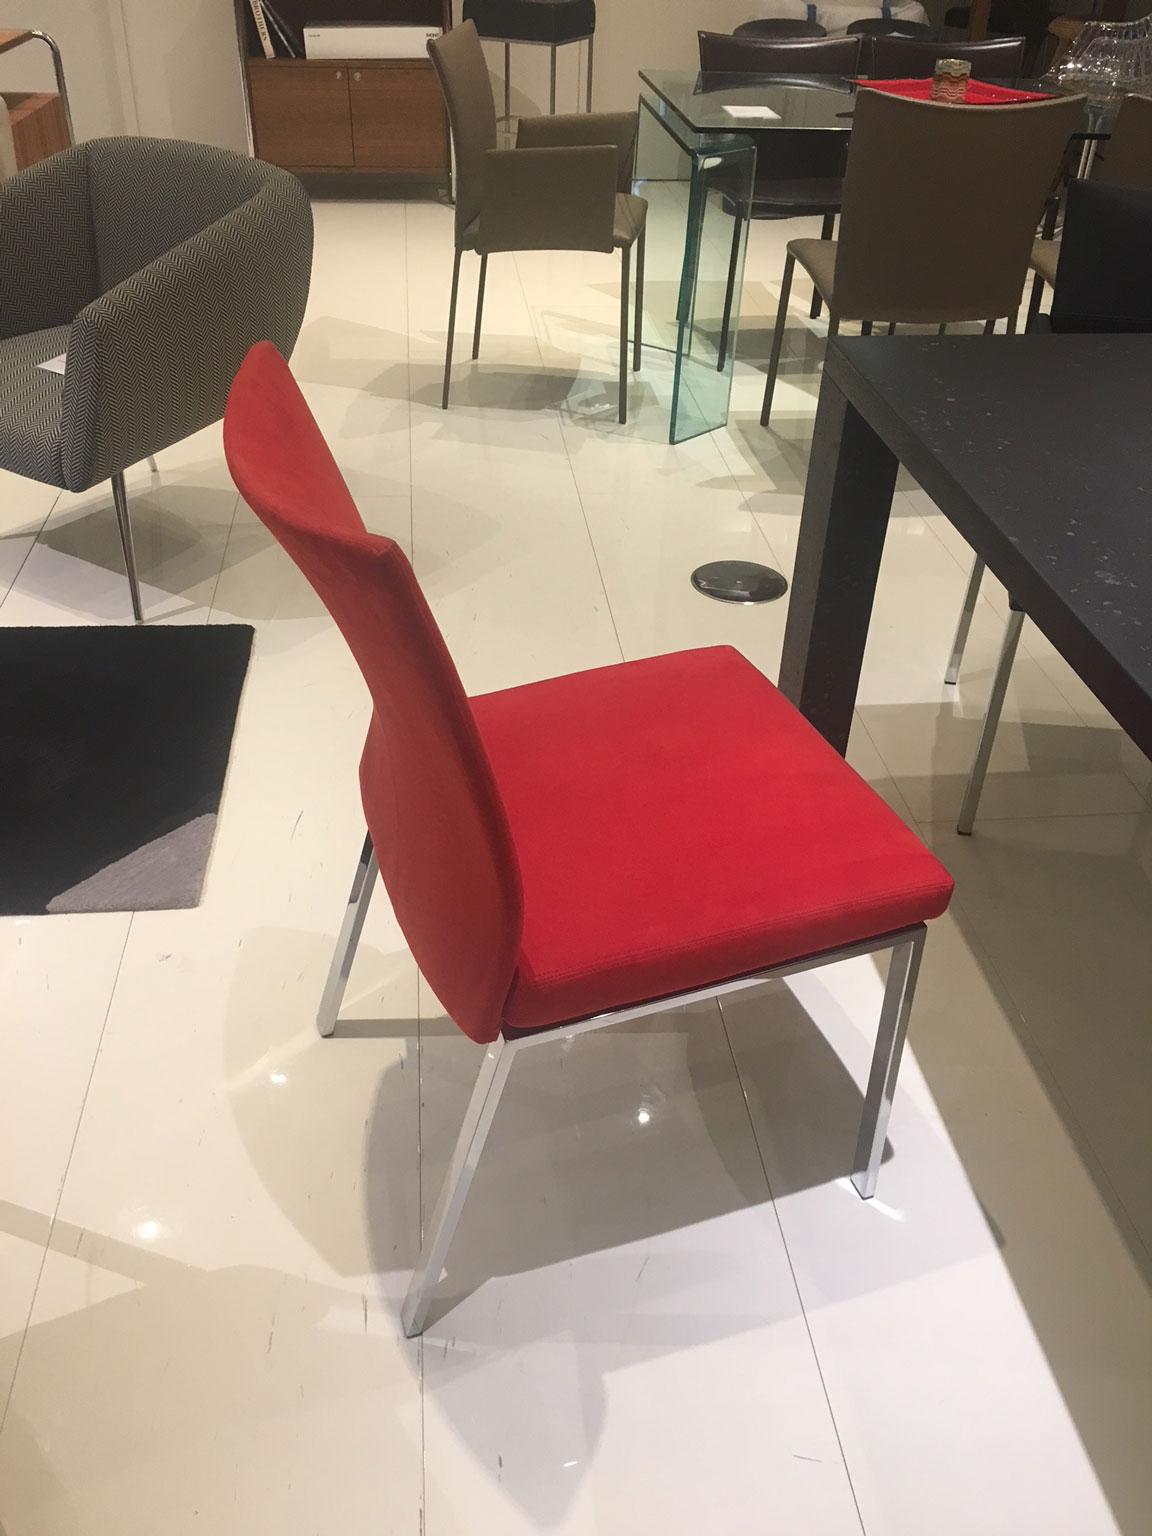 Set of 2 Red Alcantera Dining Chairs with Recline Function Polished Chrome Legs In Good Condition For Sale In Chicago, IL